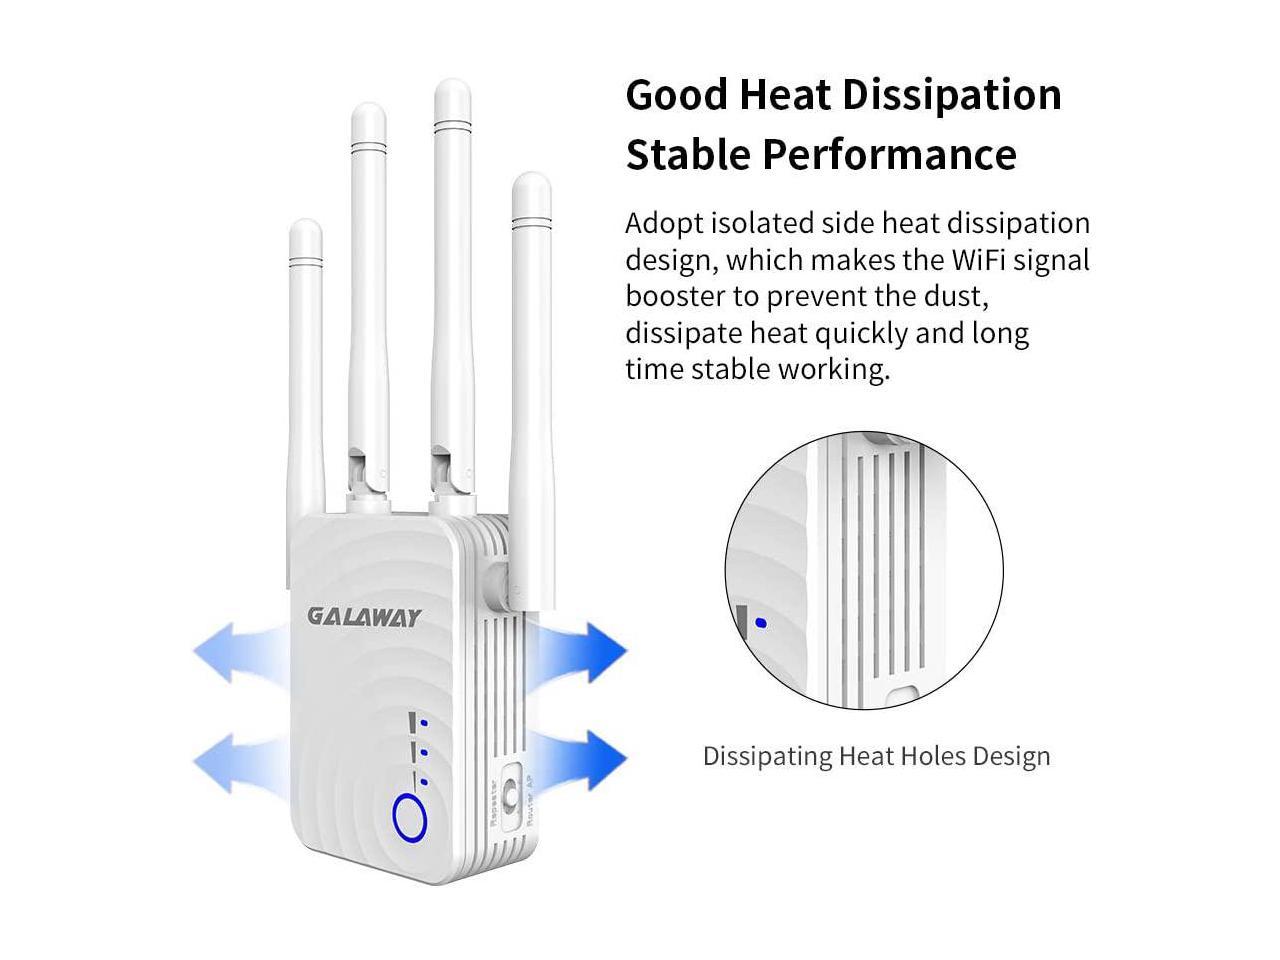 GALAWAY G1208 WiFi Extender 1200Mbps WiFi Repeater Wireless Signal Booster 360 Degree Full Coverage G0087 2.4 & 5GHz Dual Band WiFi Extender with Ethernet Port 